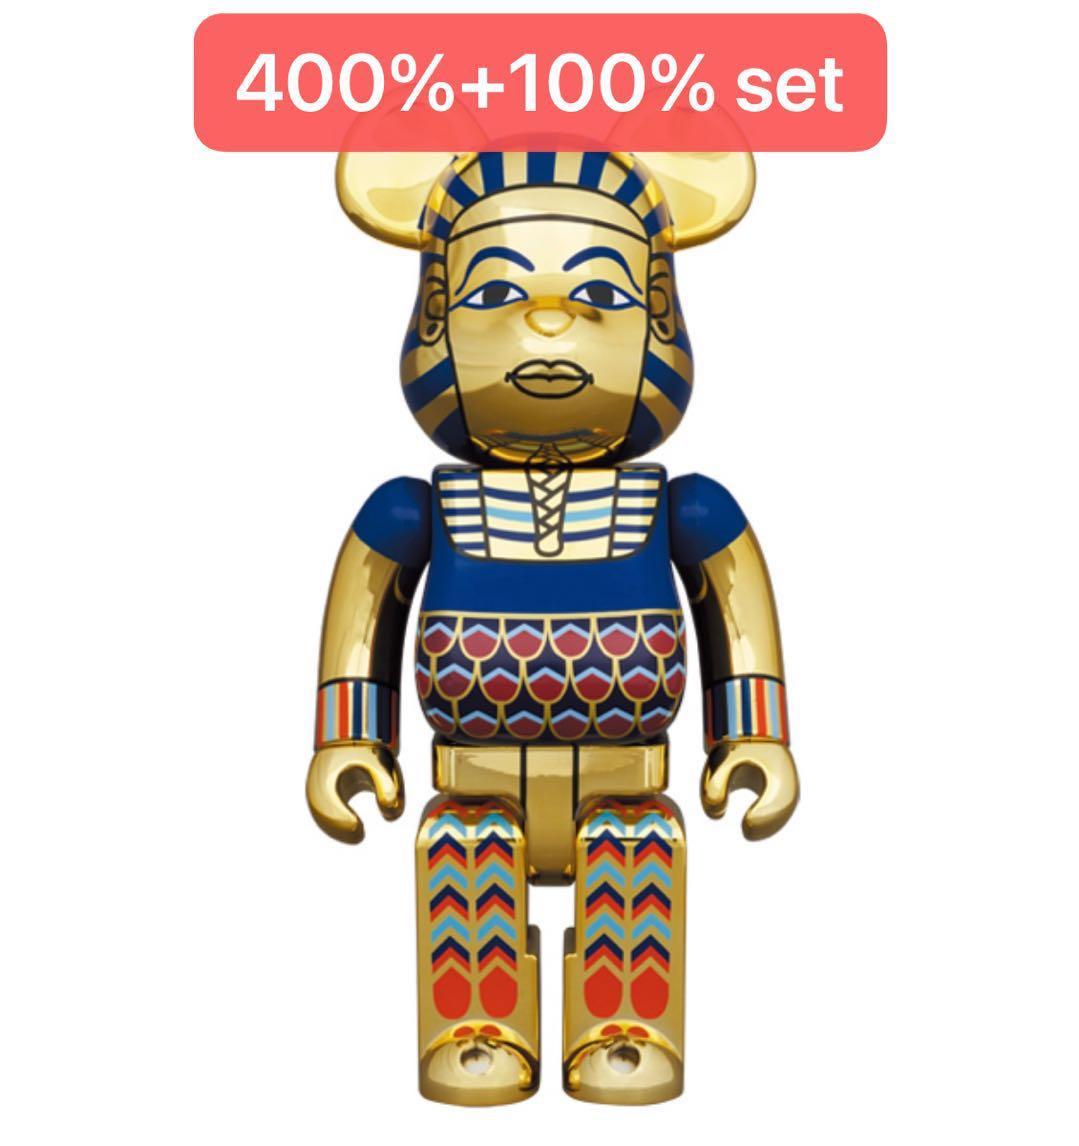 In Stock] BE@RBRICK x Ancient Egypt 400%+100% set bearbrick (Event ...